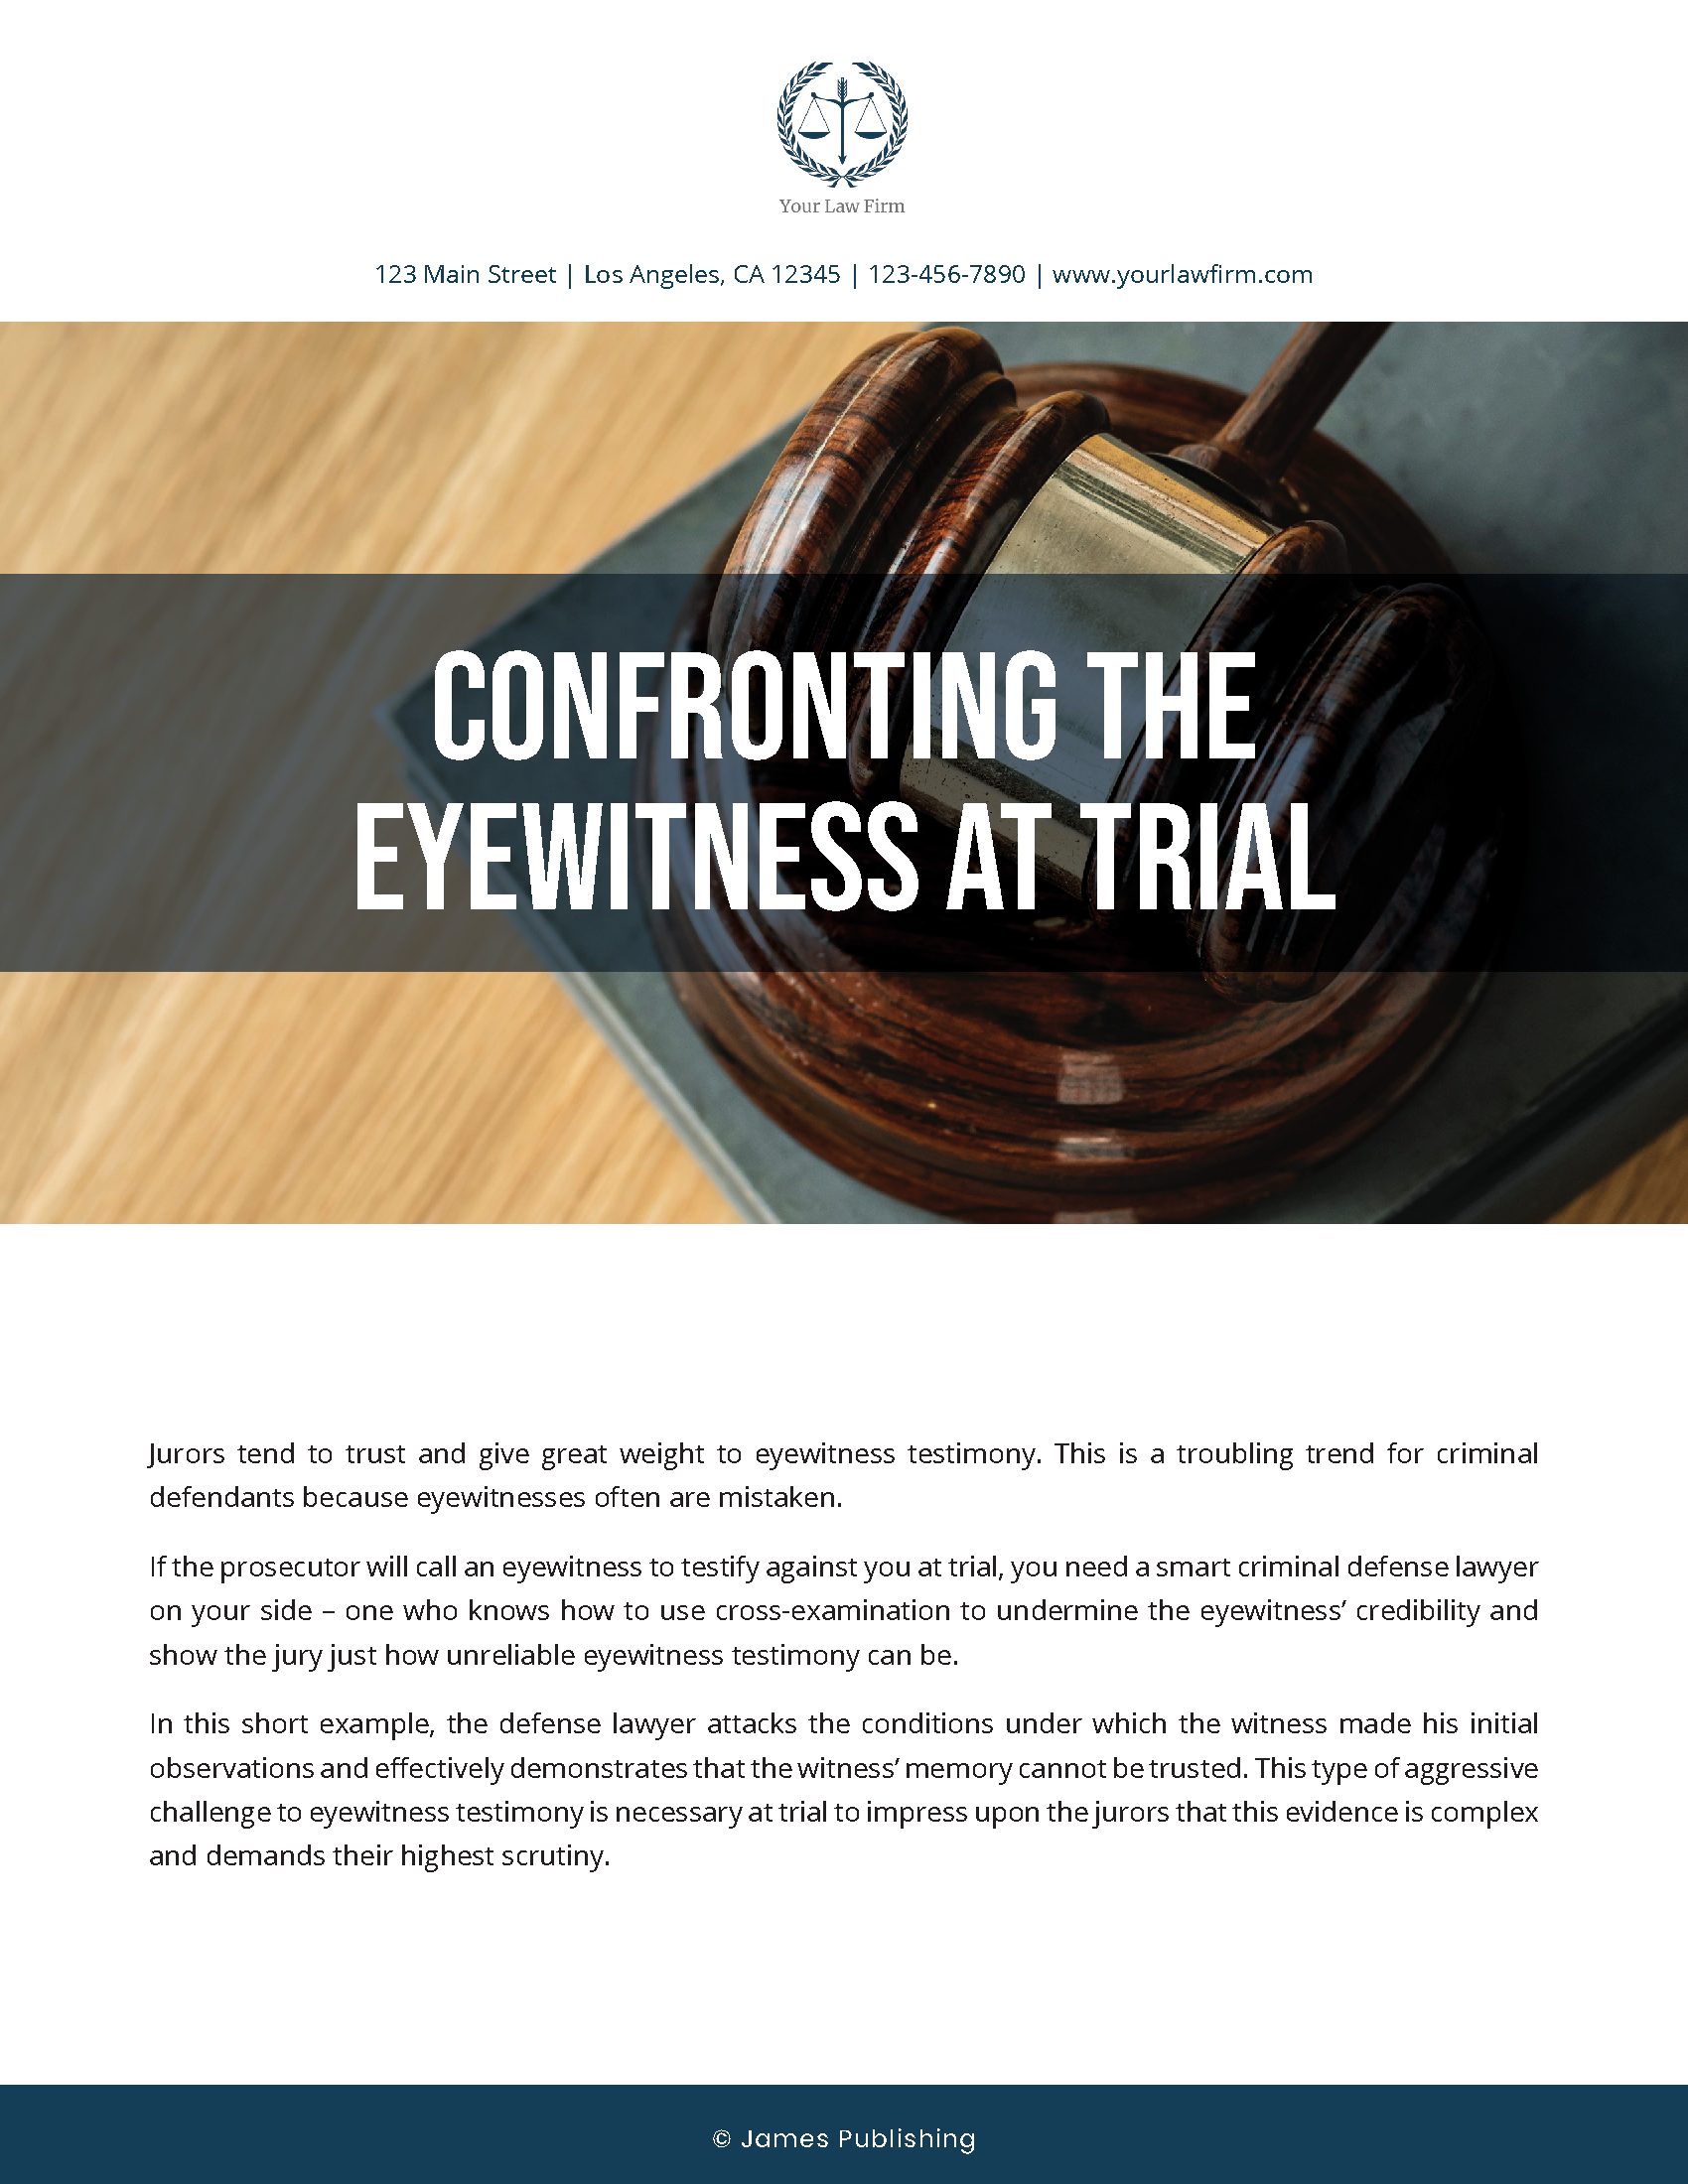 CRIM-14 Confronting the Eyewitness at Trial